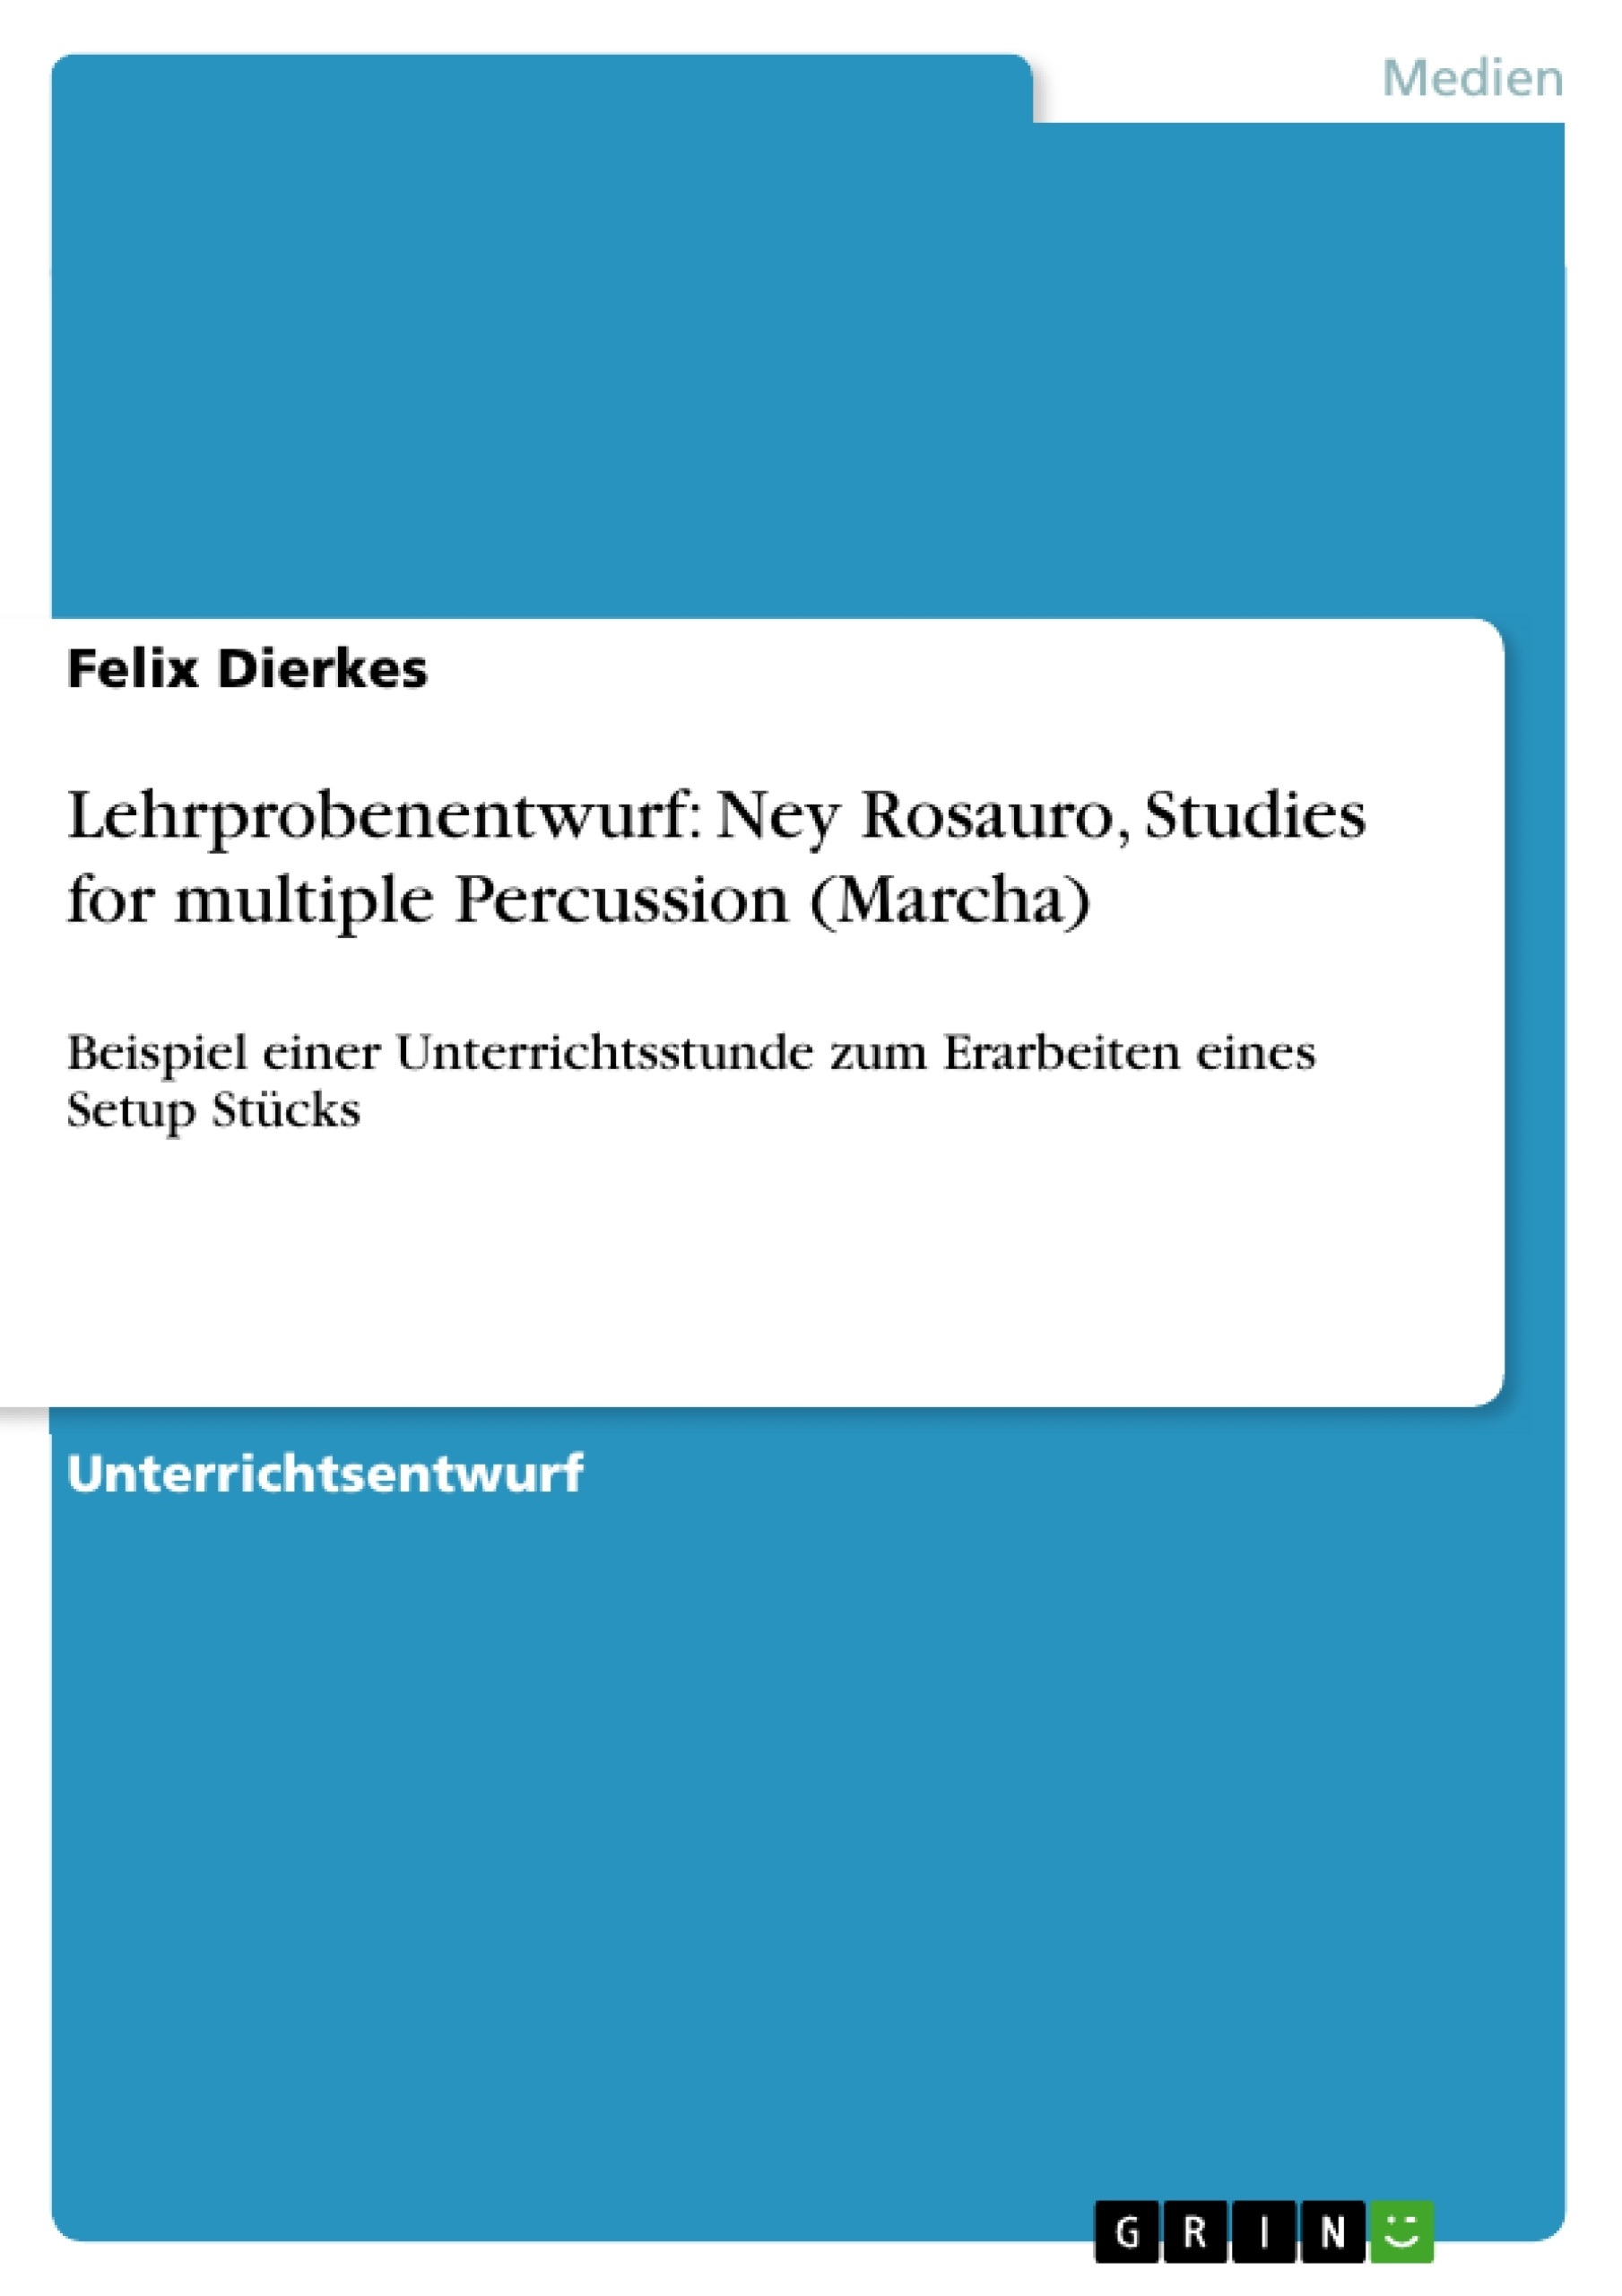 Título: Lehrprobenentwurf: Ney Rosauro, Studies for multiple Percussion (Marcha)